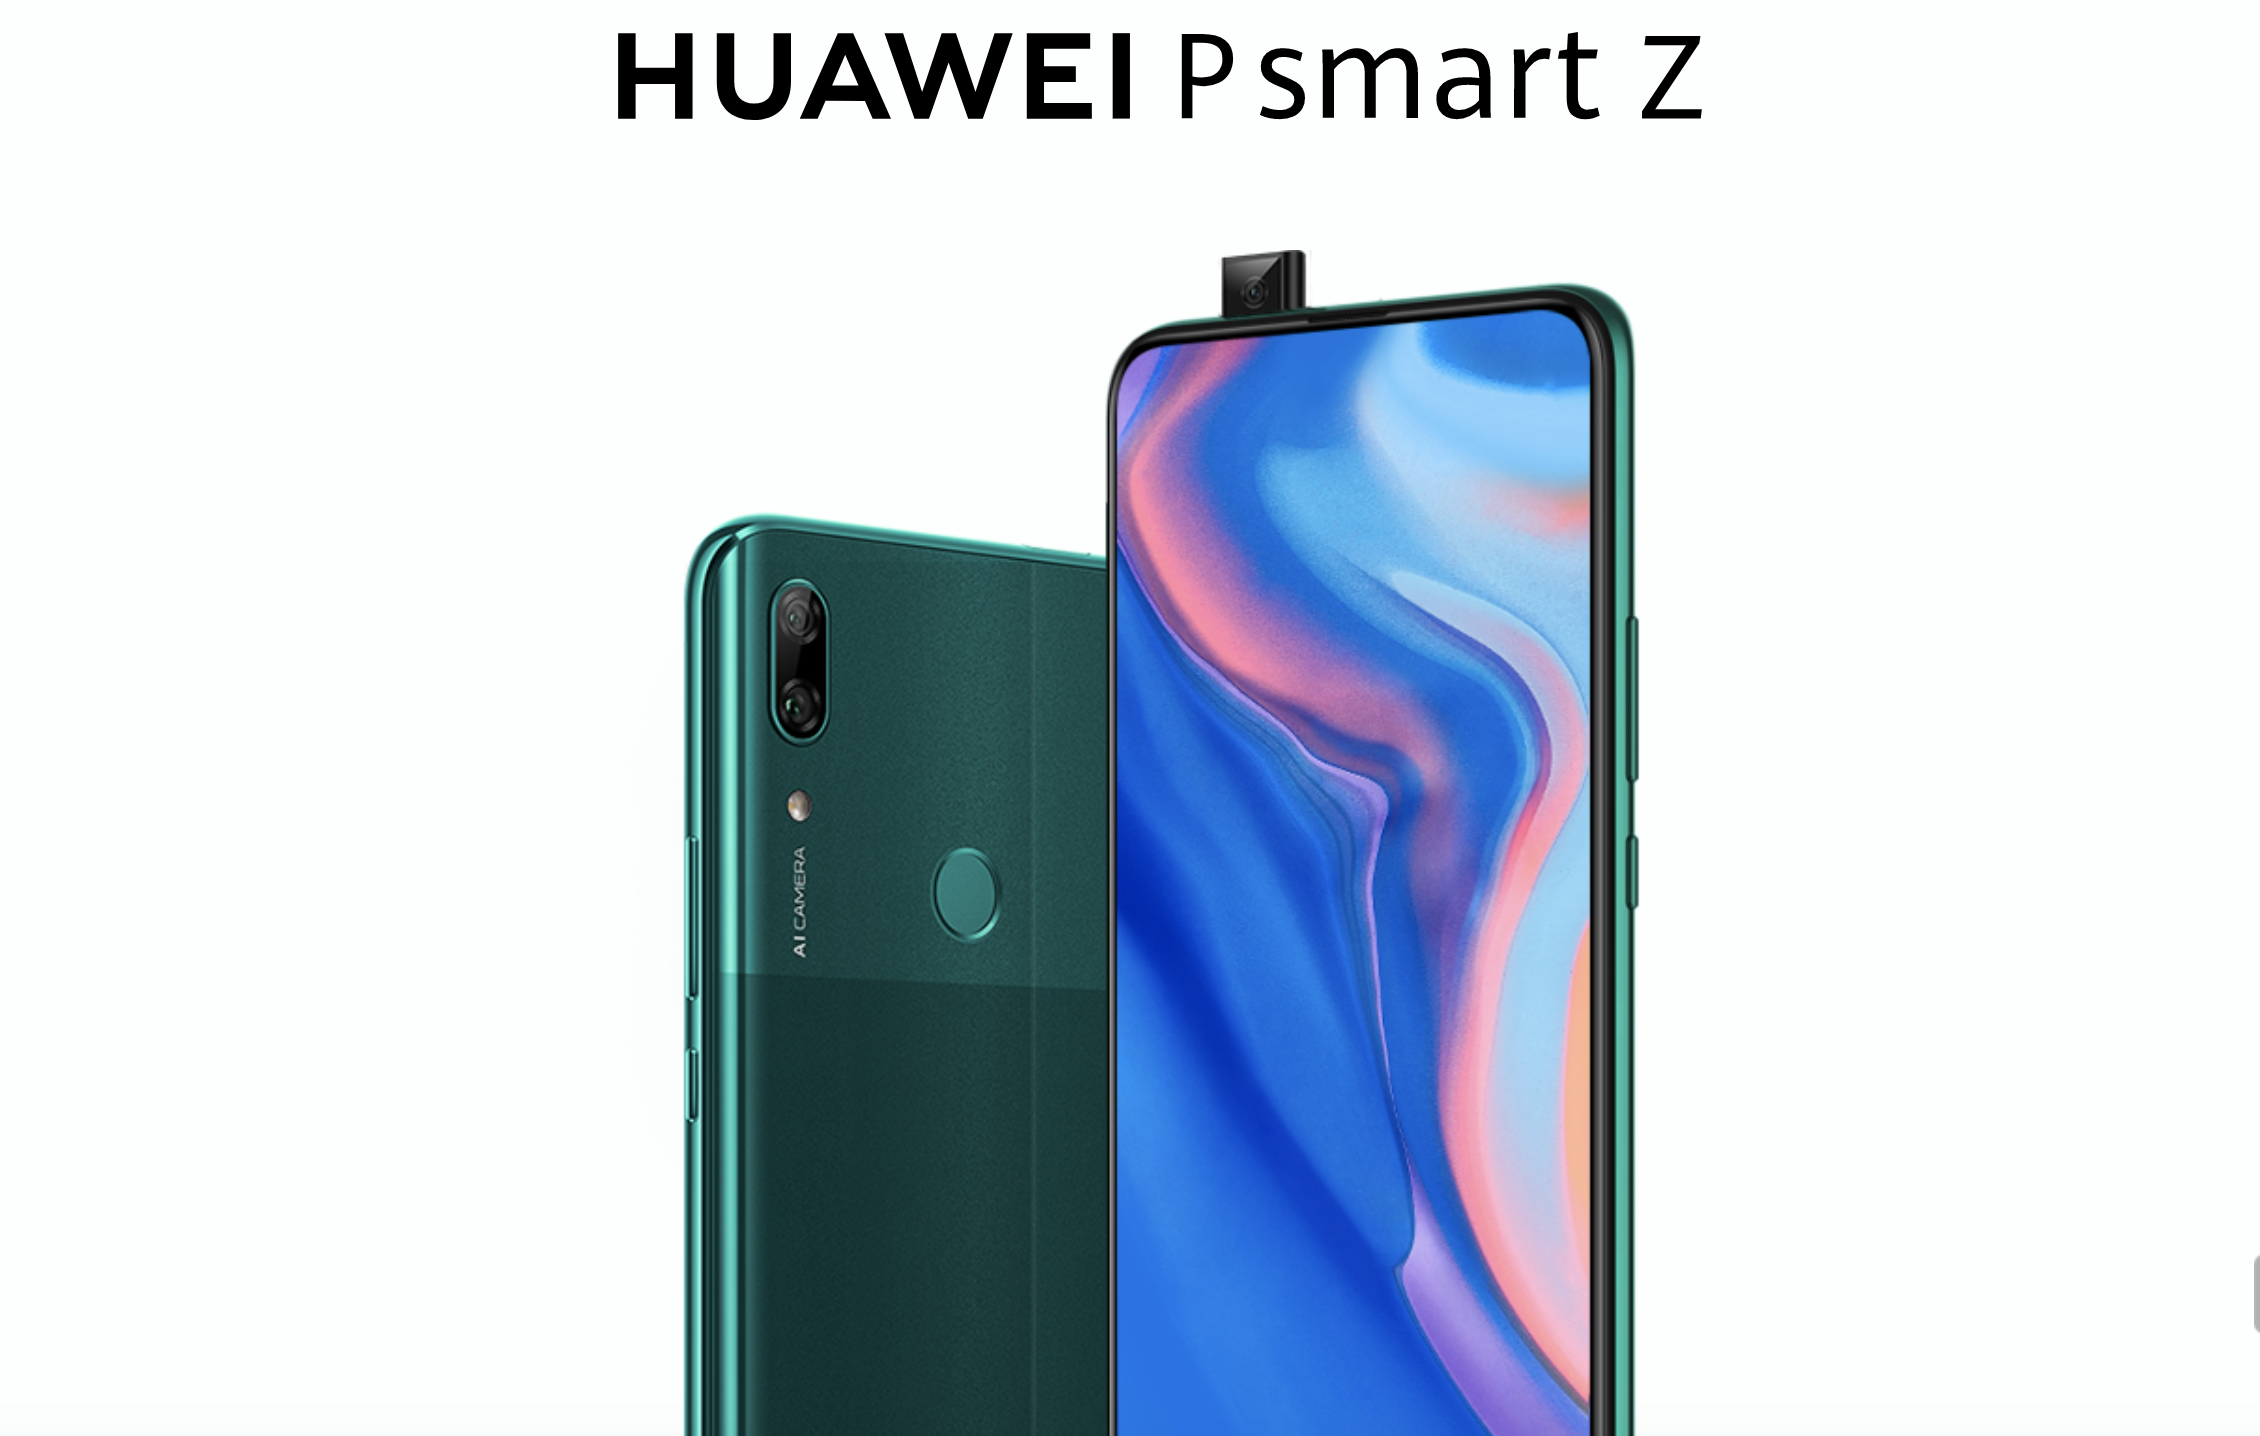 Huawei its first pop-up selfie camera smartphone P smart Z - of India